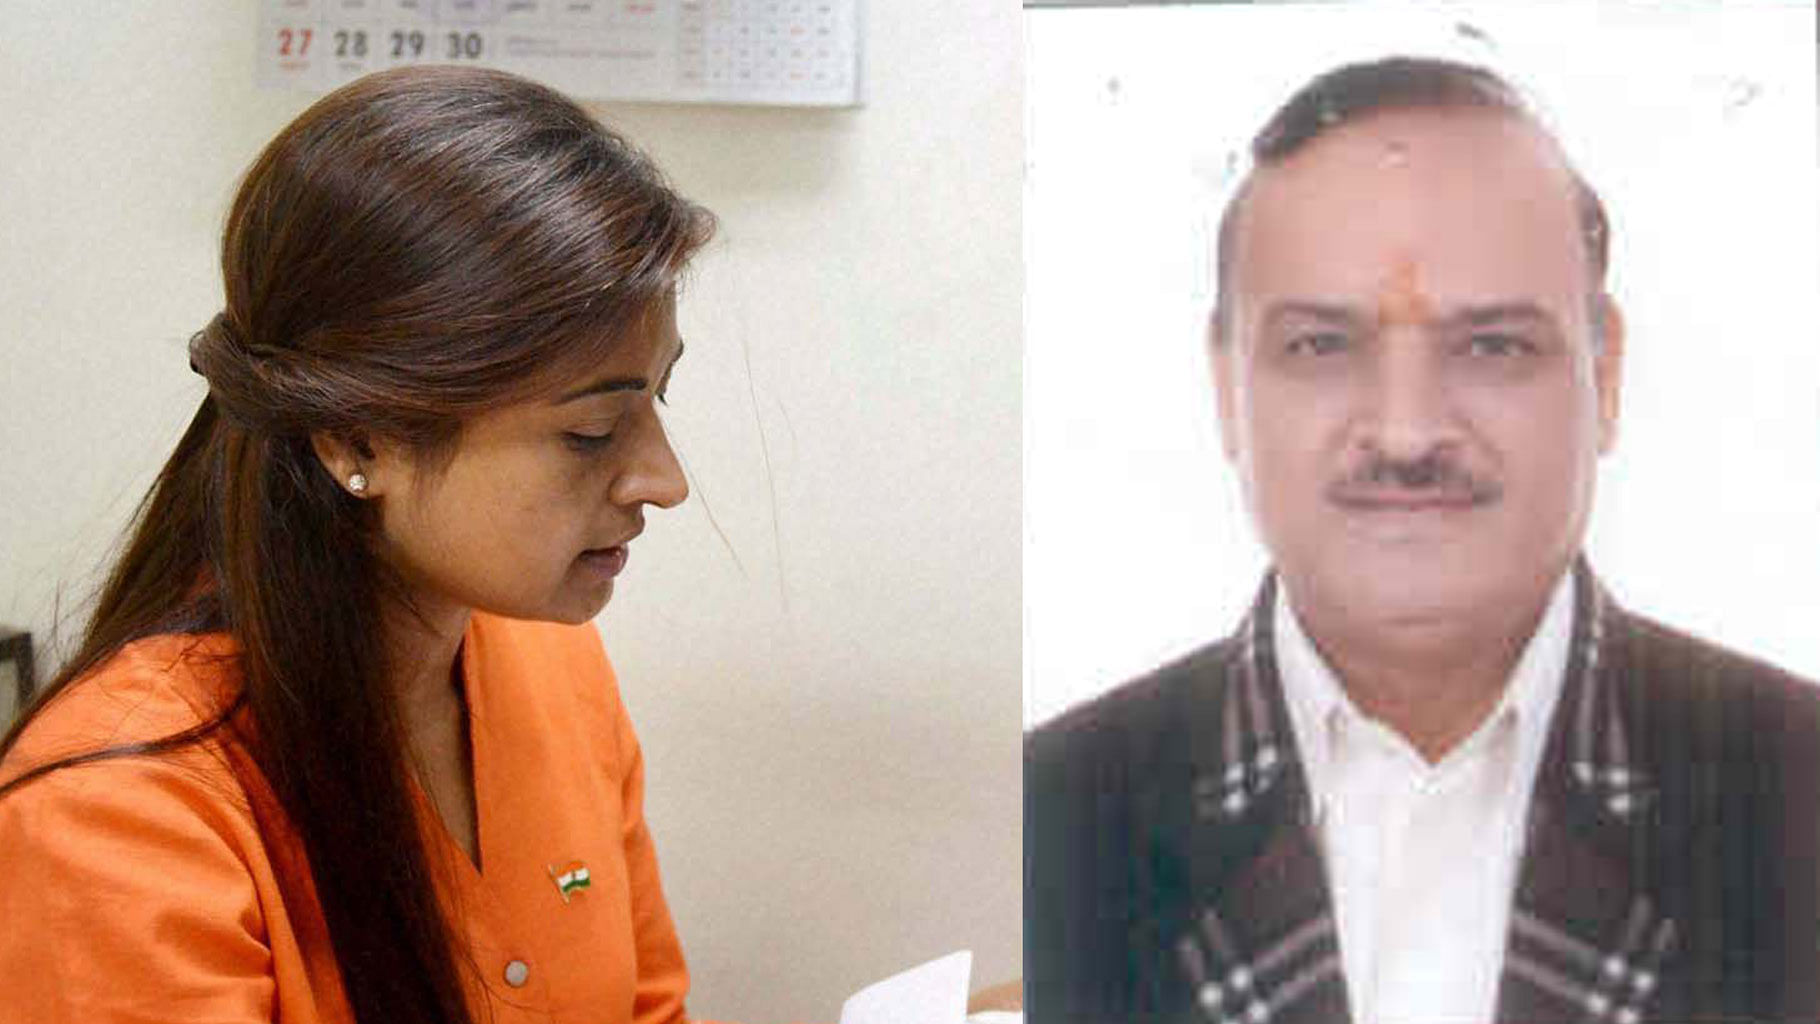 BJP leader OP Sharma (right) suspended from Delhi Assembly for sexist remarks. (Photo Courtesy: <a href="http://delhiassembly.nic.in/aspfile/whos_who/VIthAssembly/WhosWho/OmPrakashSharma.htm">Delhi Legislative Assembly</a>)